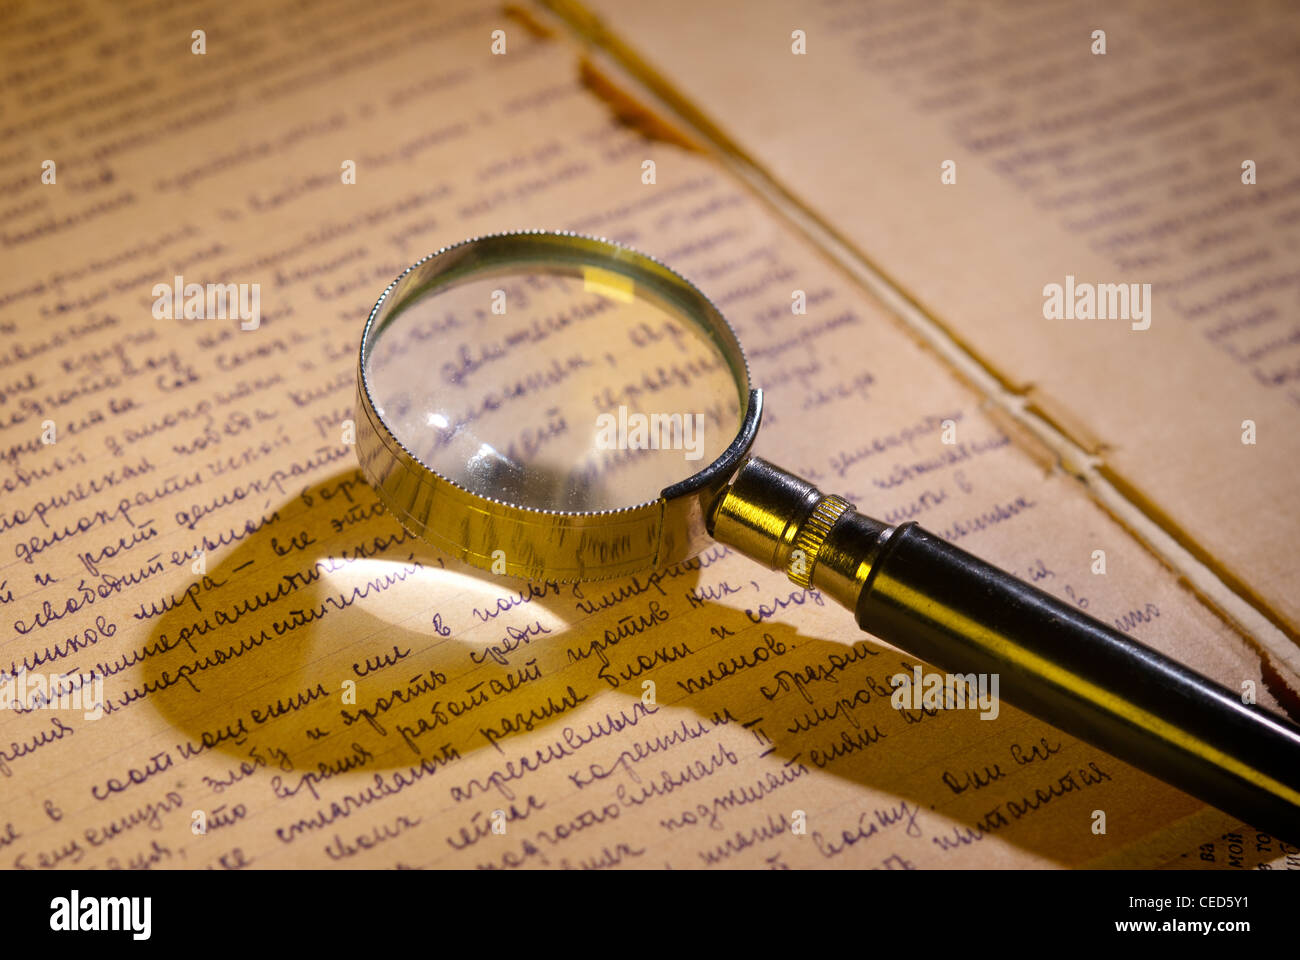 Magnifier glass on page of ancient manuscript, old newspaper Stock Photo